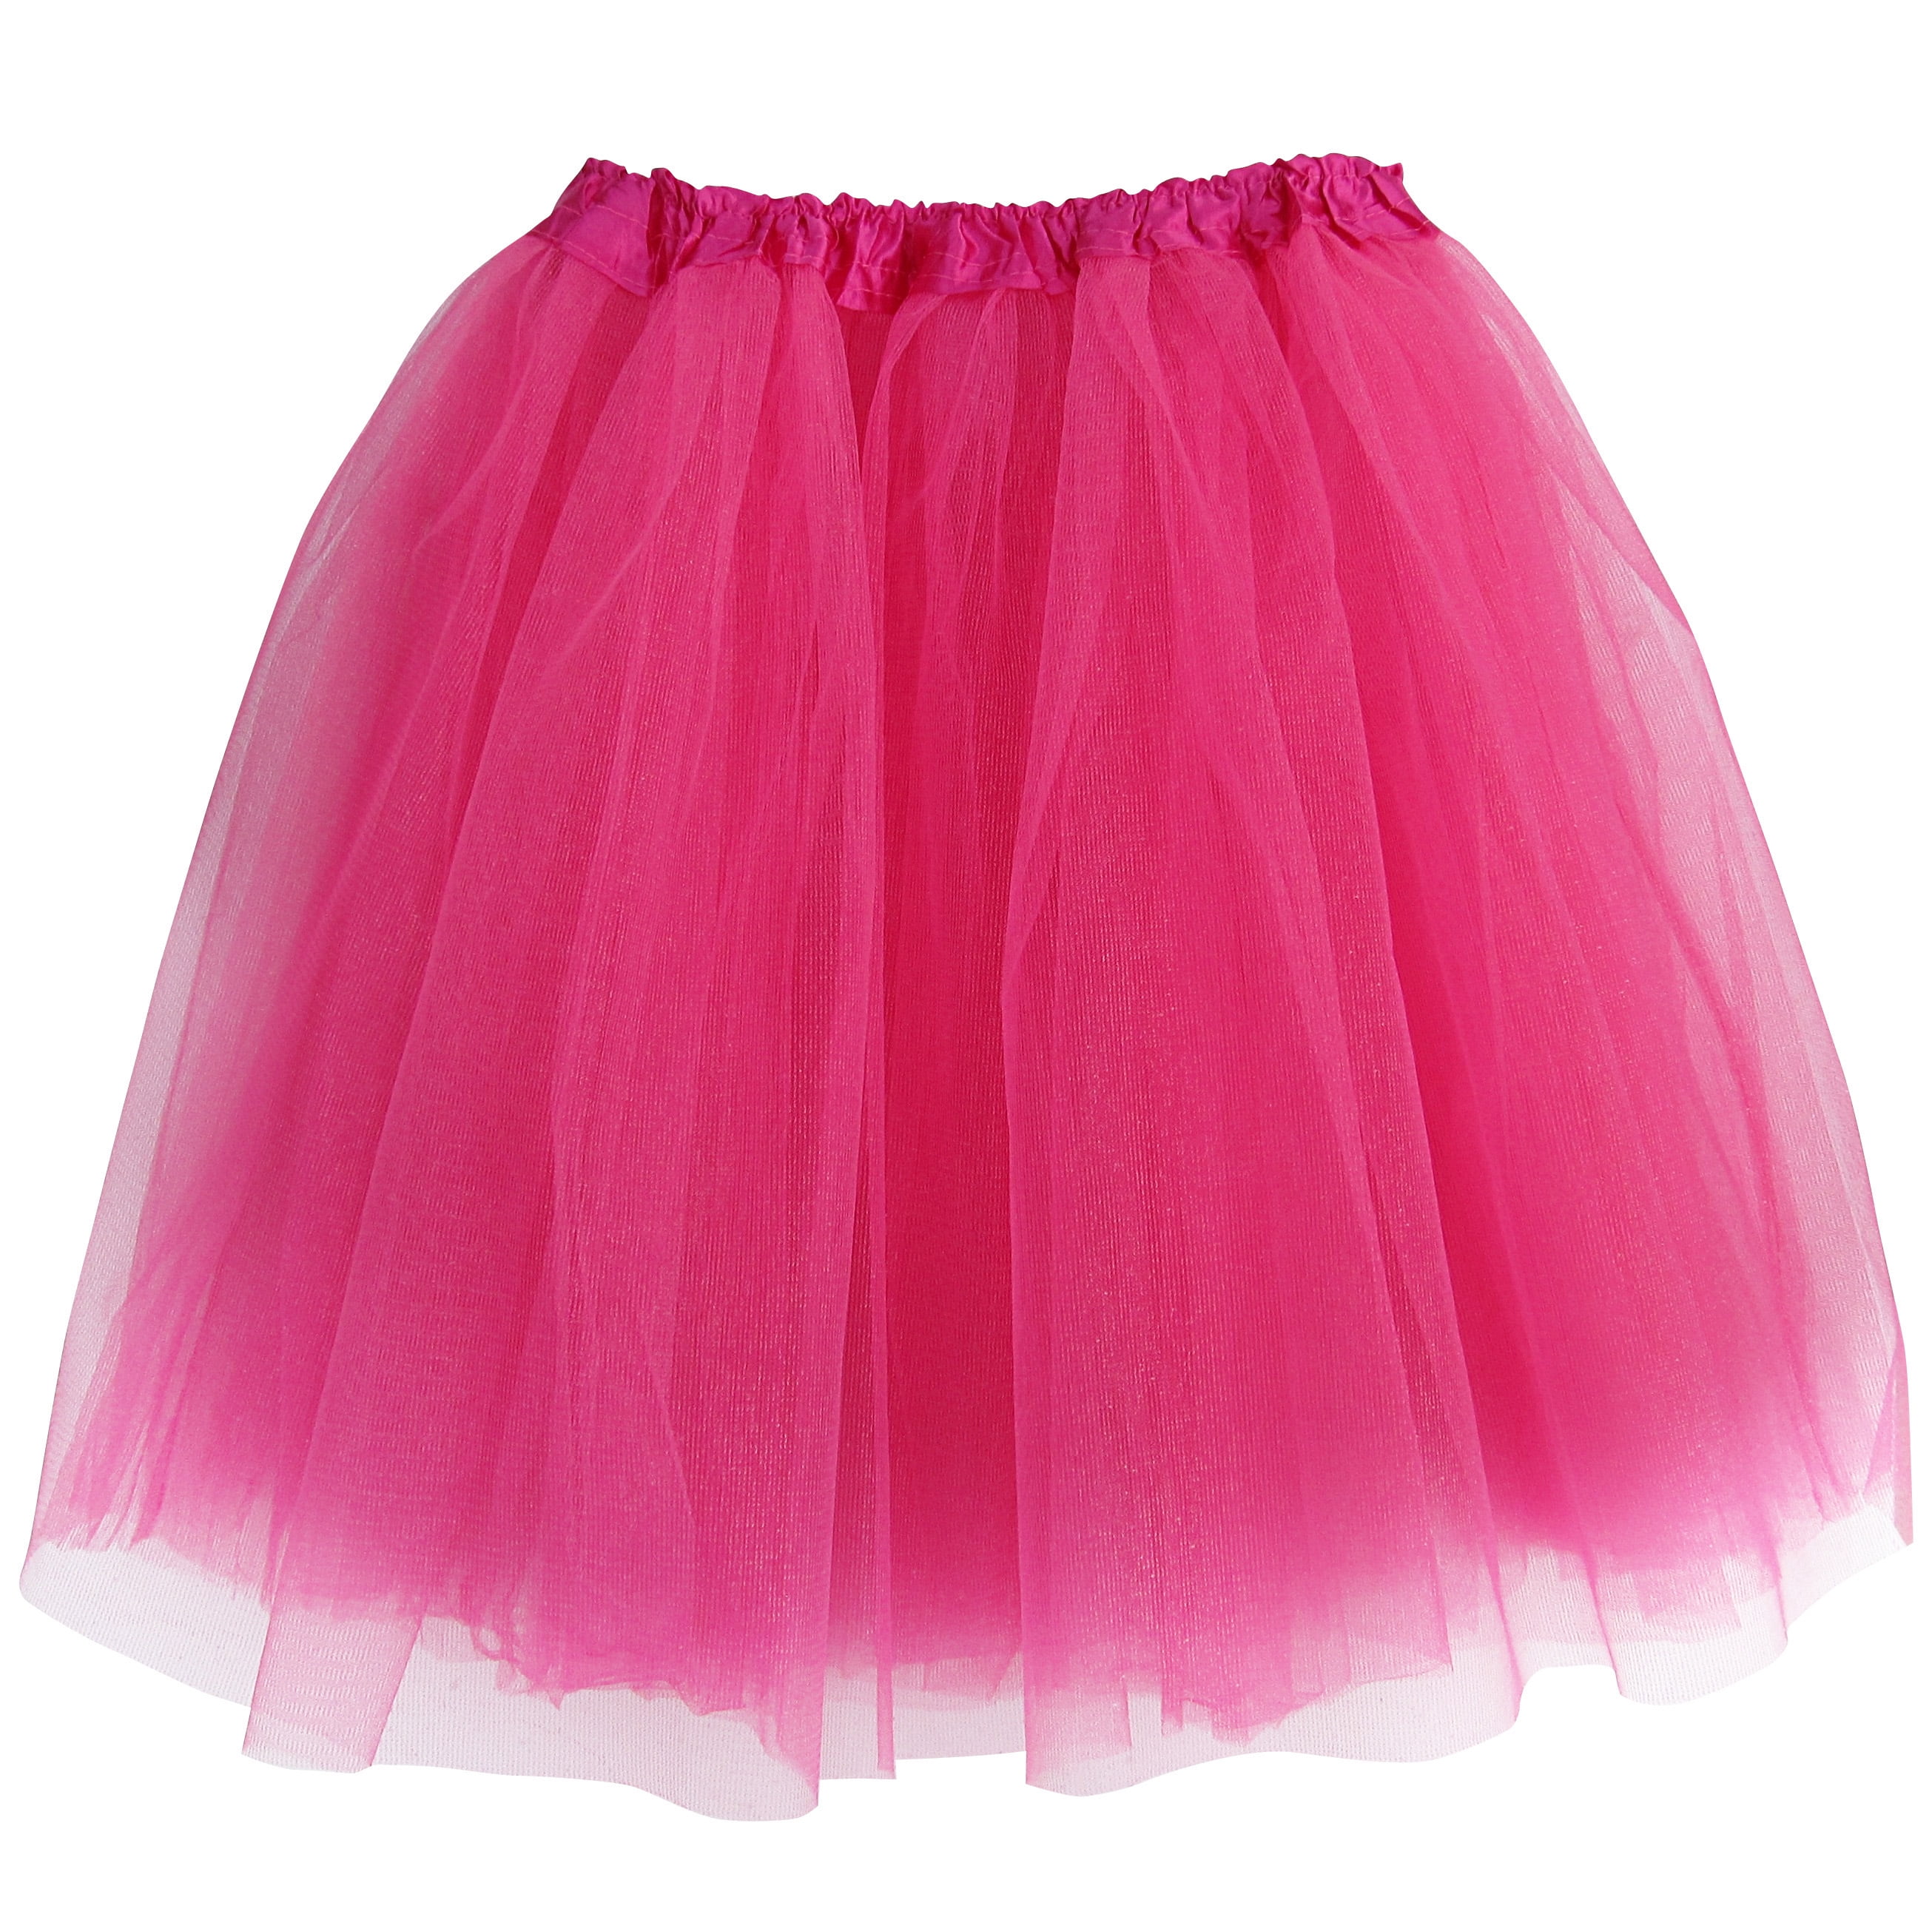 New Glitter tulle Tutu 3 layers girls sizes different colors Tutu only 